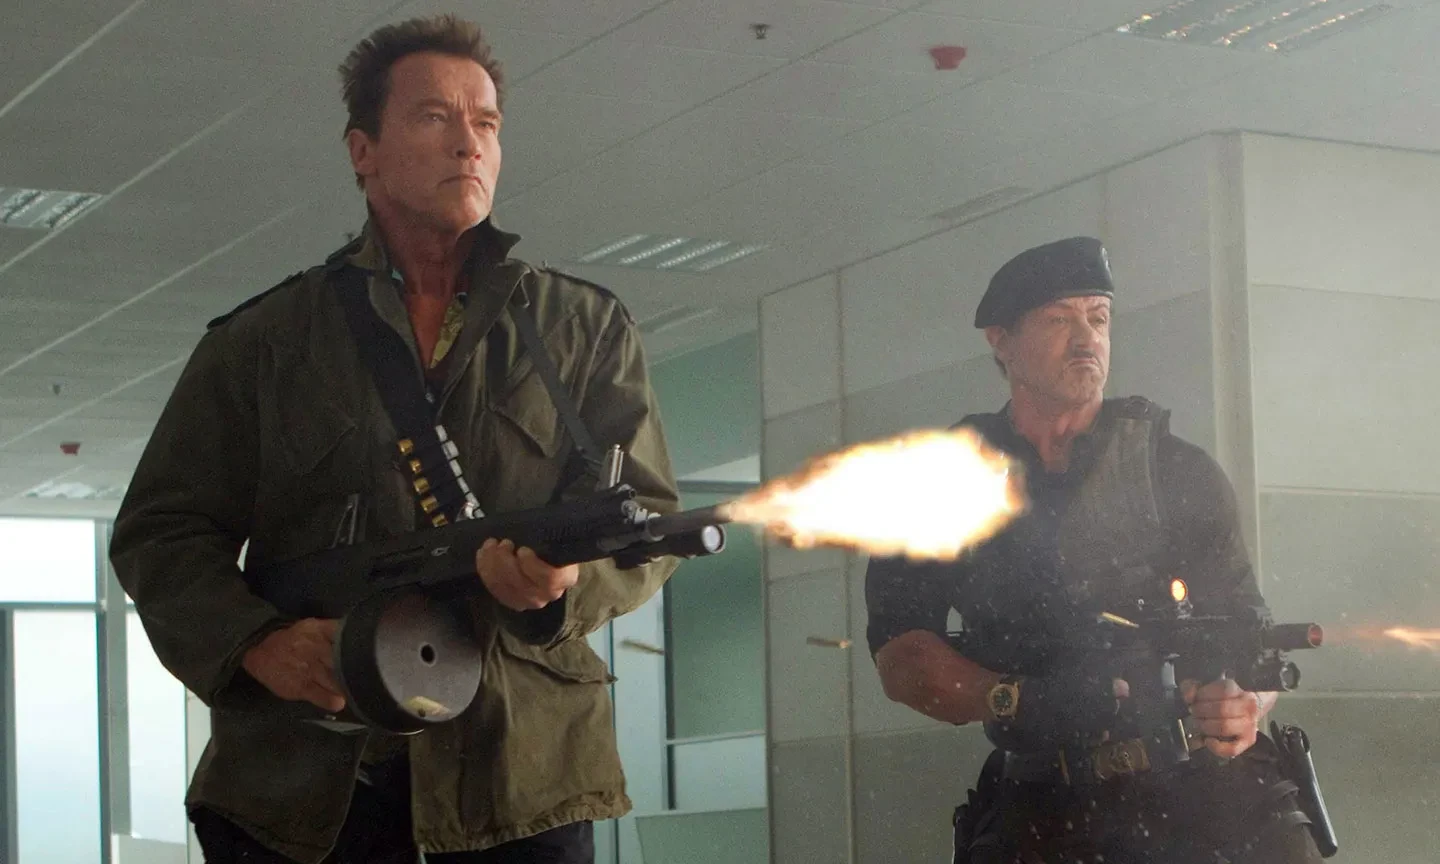 Arnold Schwarzenegger along with Sylvester Stallone in the Expendables 3.